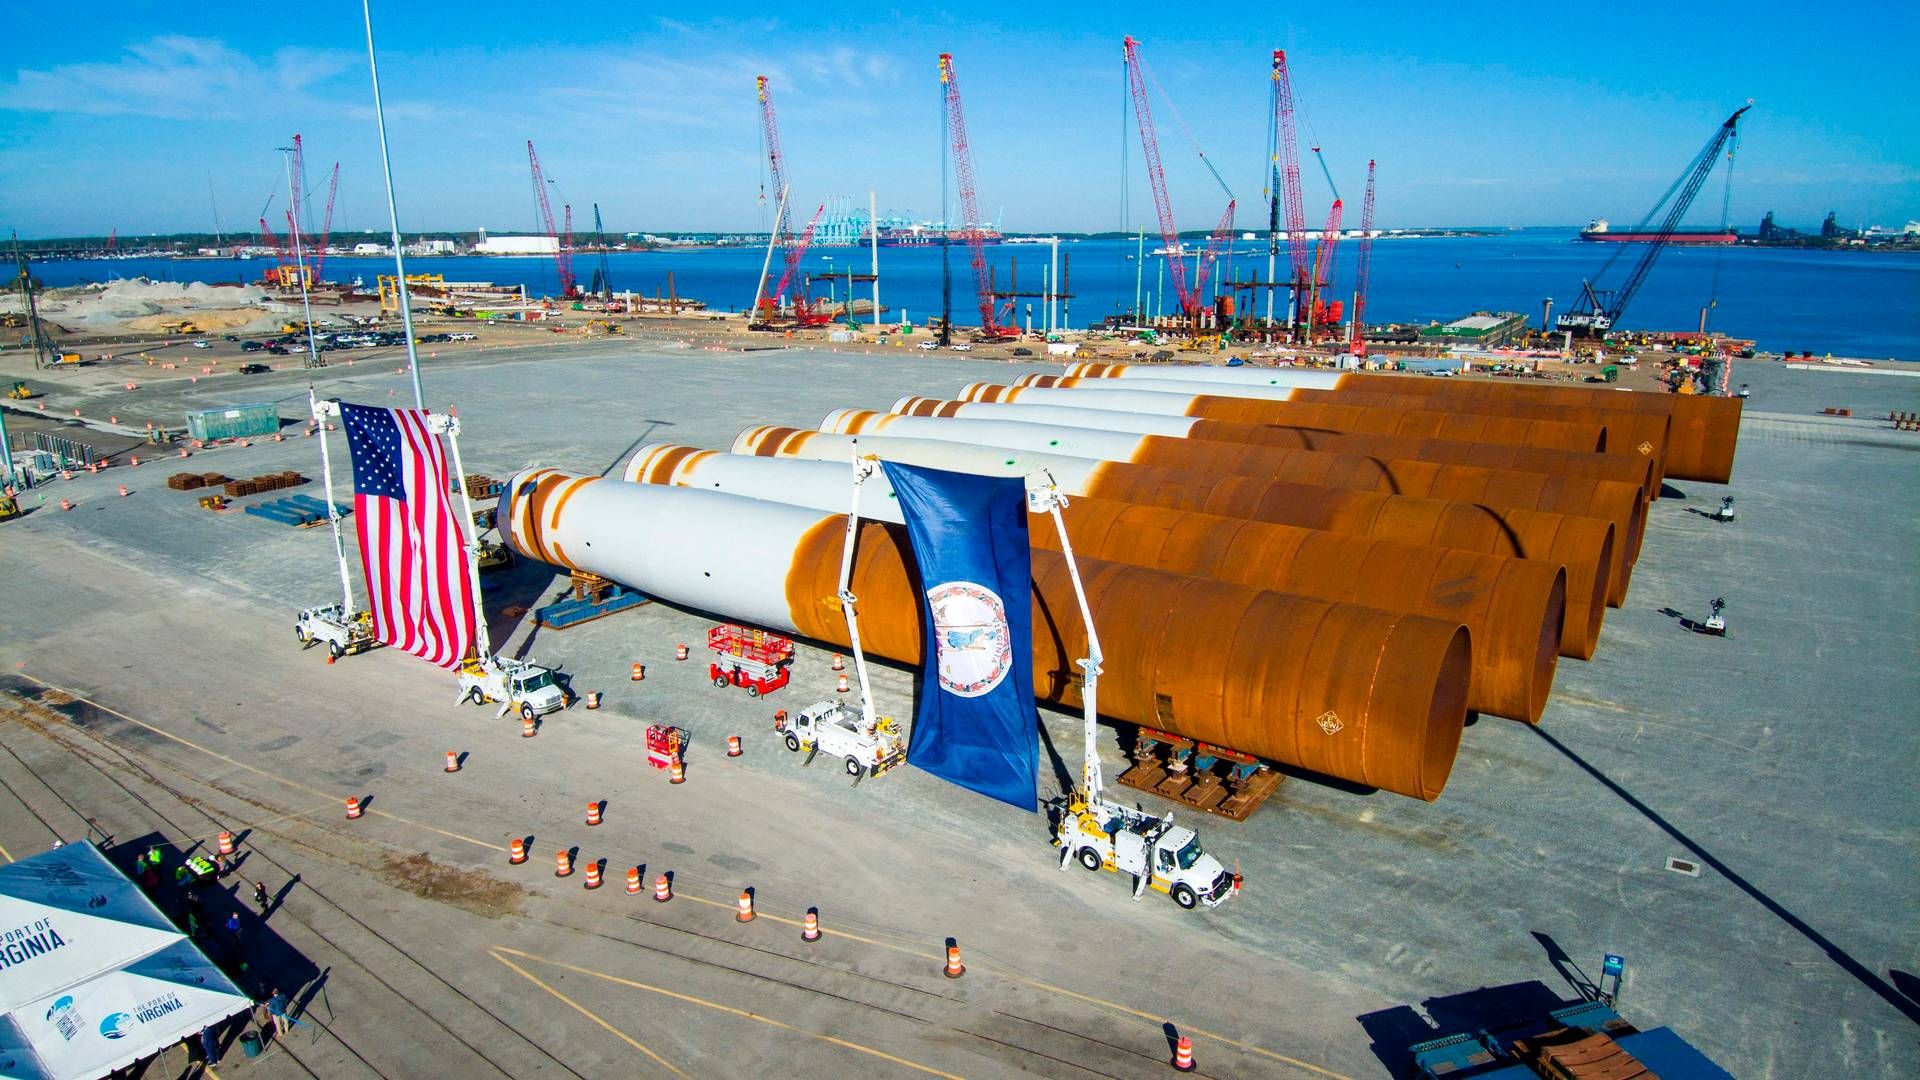 Last month, Dominion Energy received the first monopiles from EEW for its 2.6 GW Coastal Virginia project. It is on schedule and on budget, the company states. | Photo: Handout